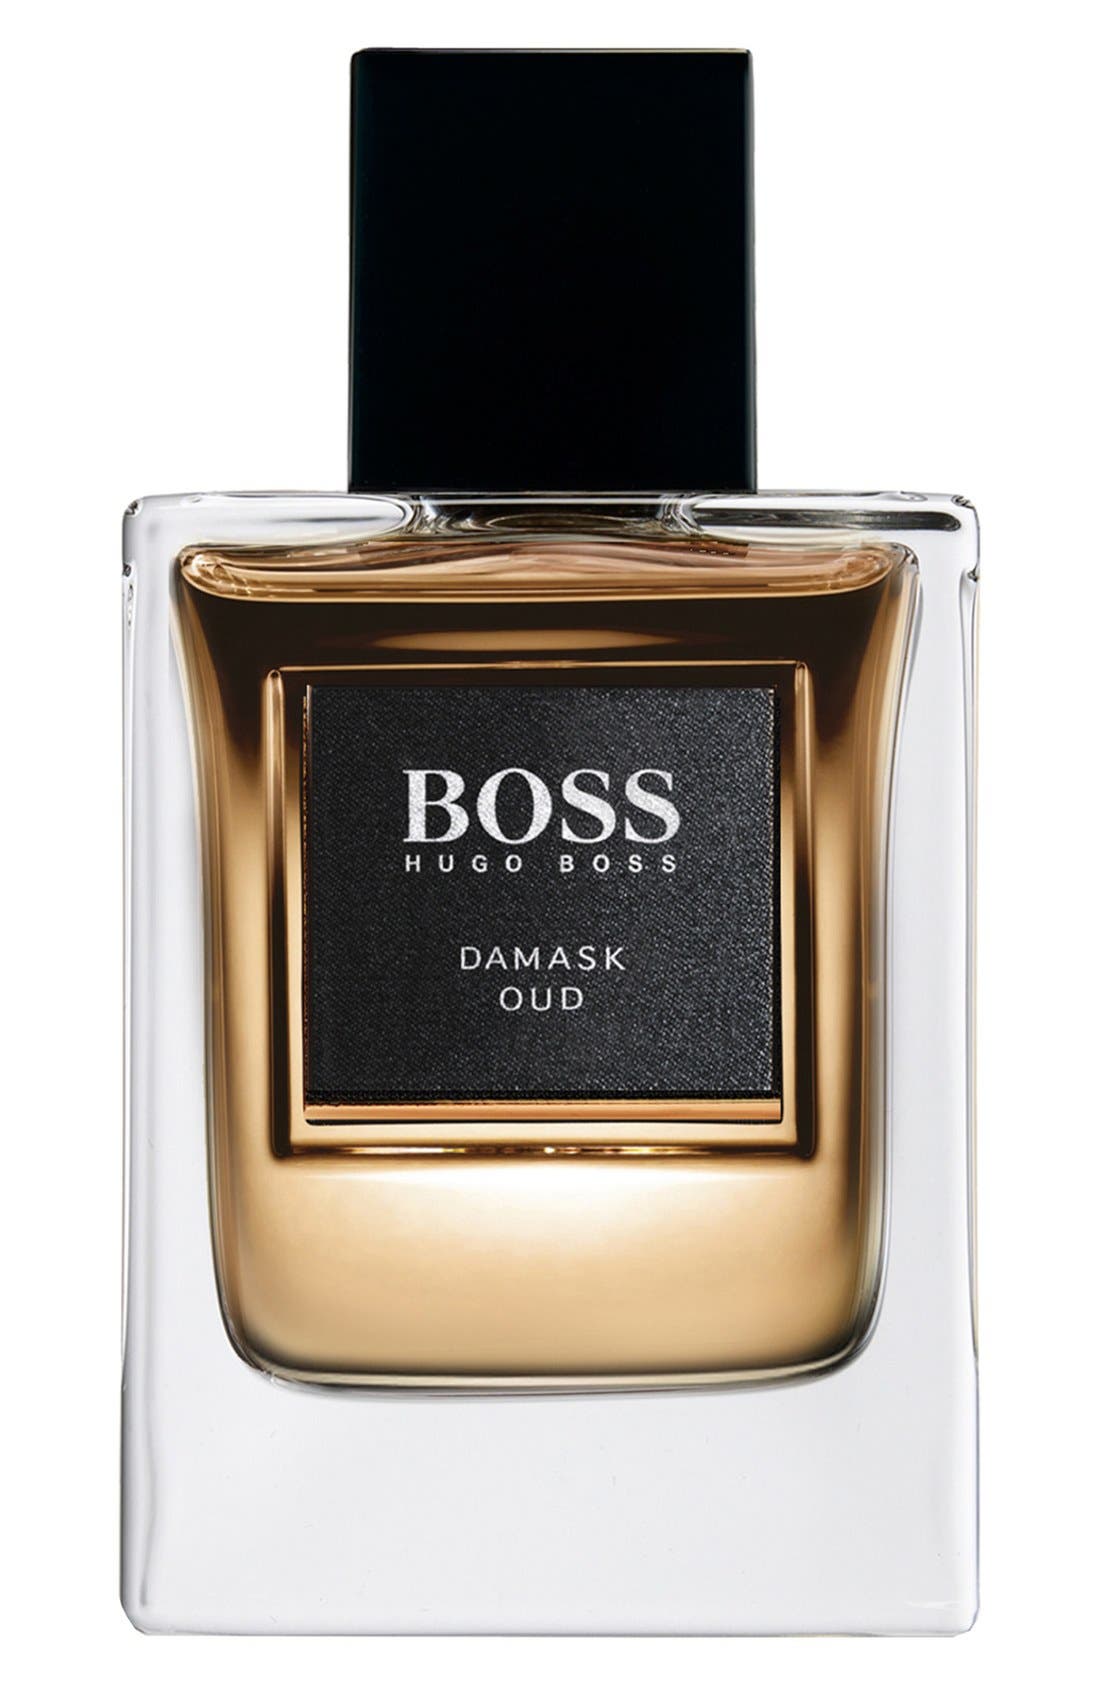 BOSS 'The Collection - Damask Oud' Eau 